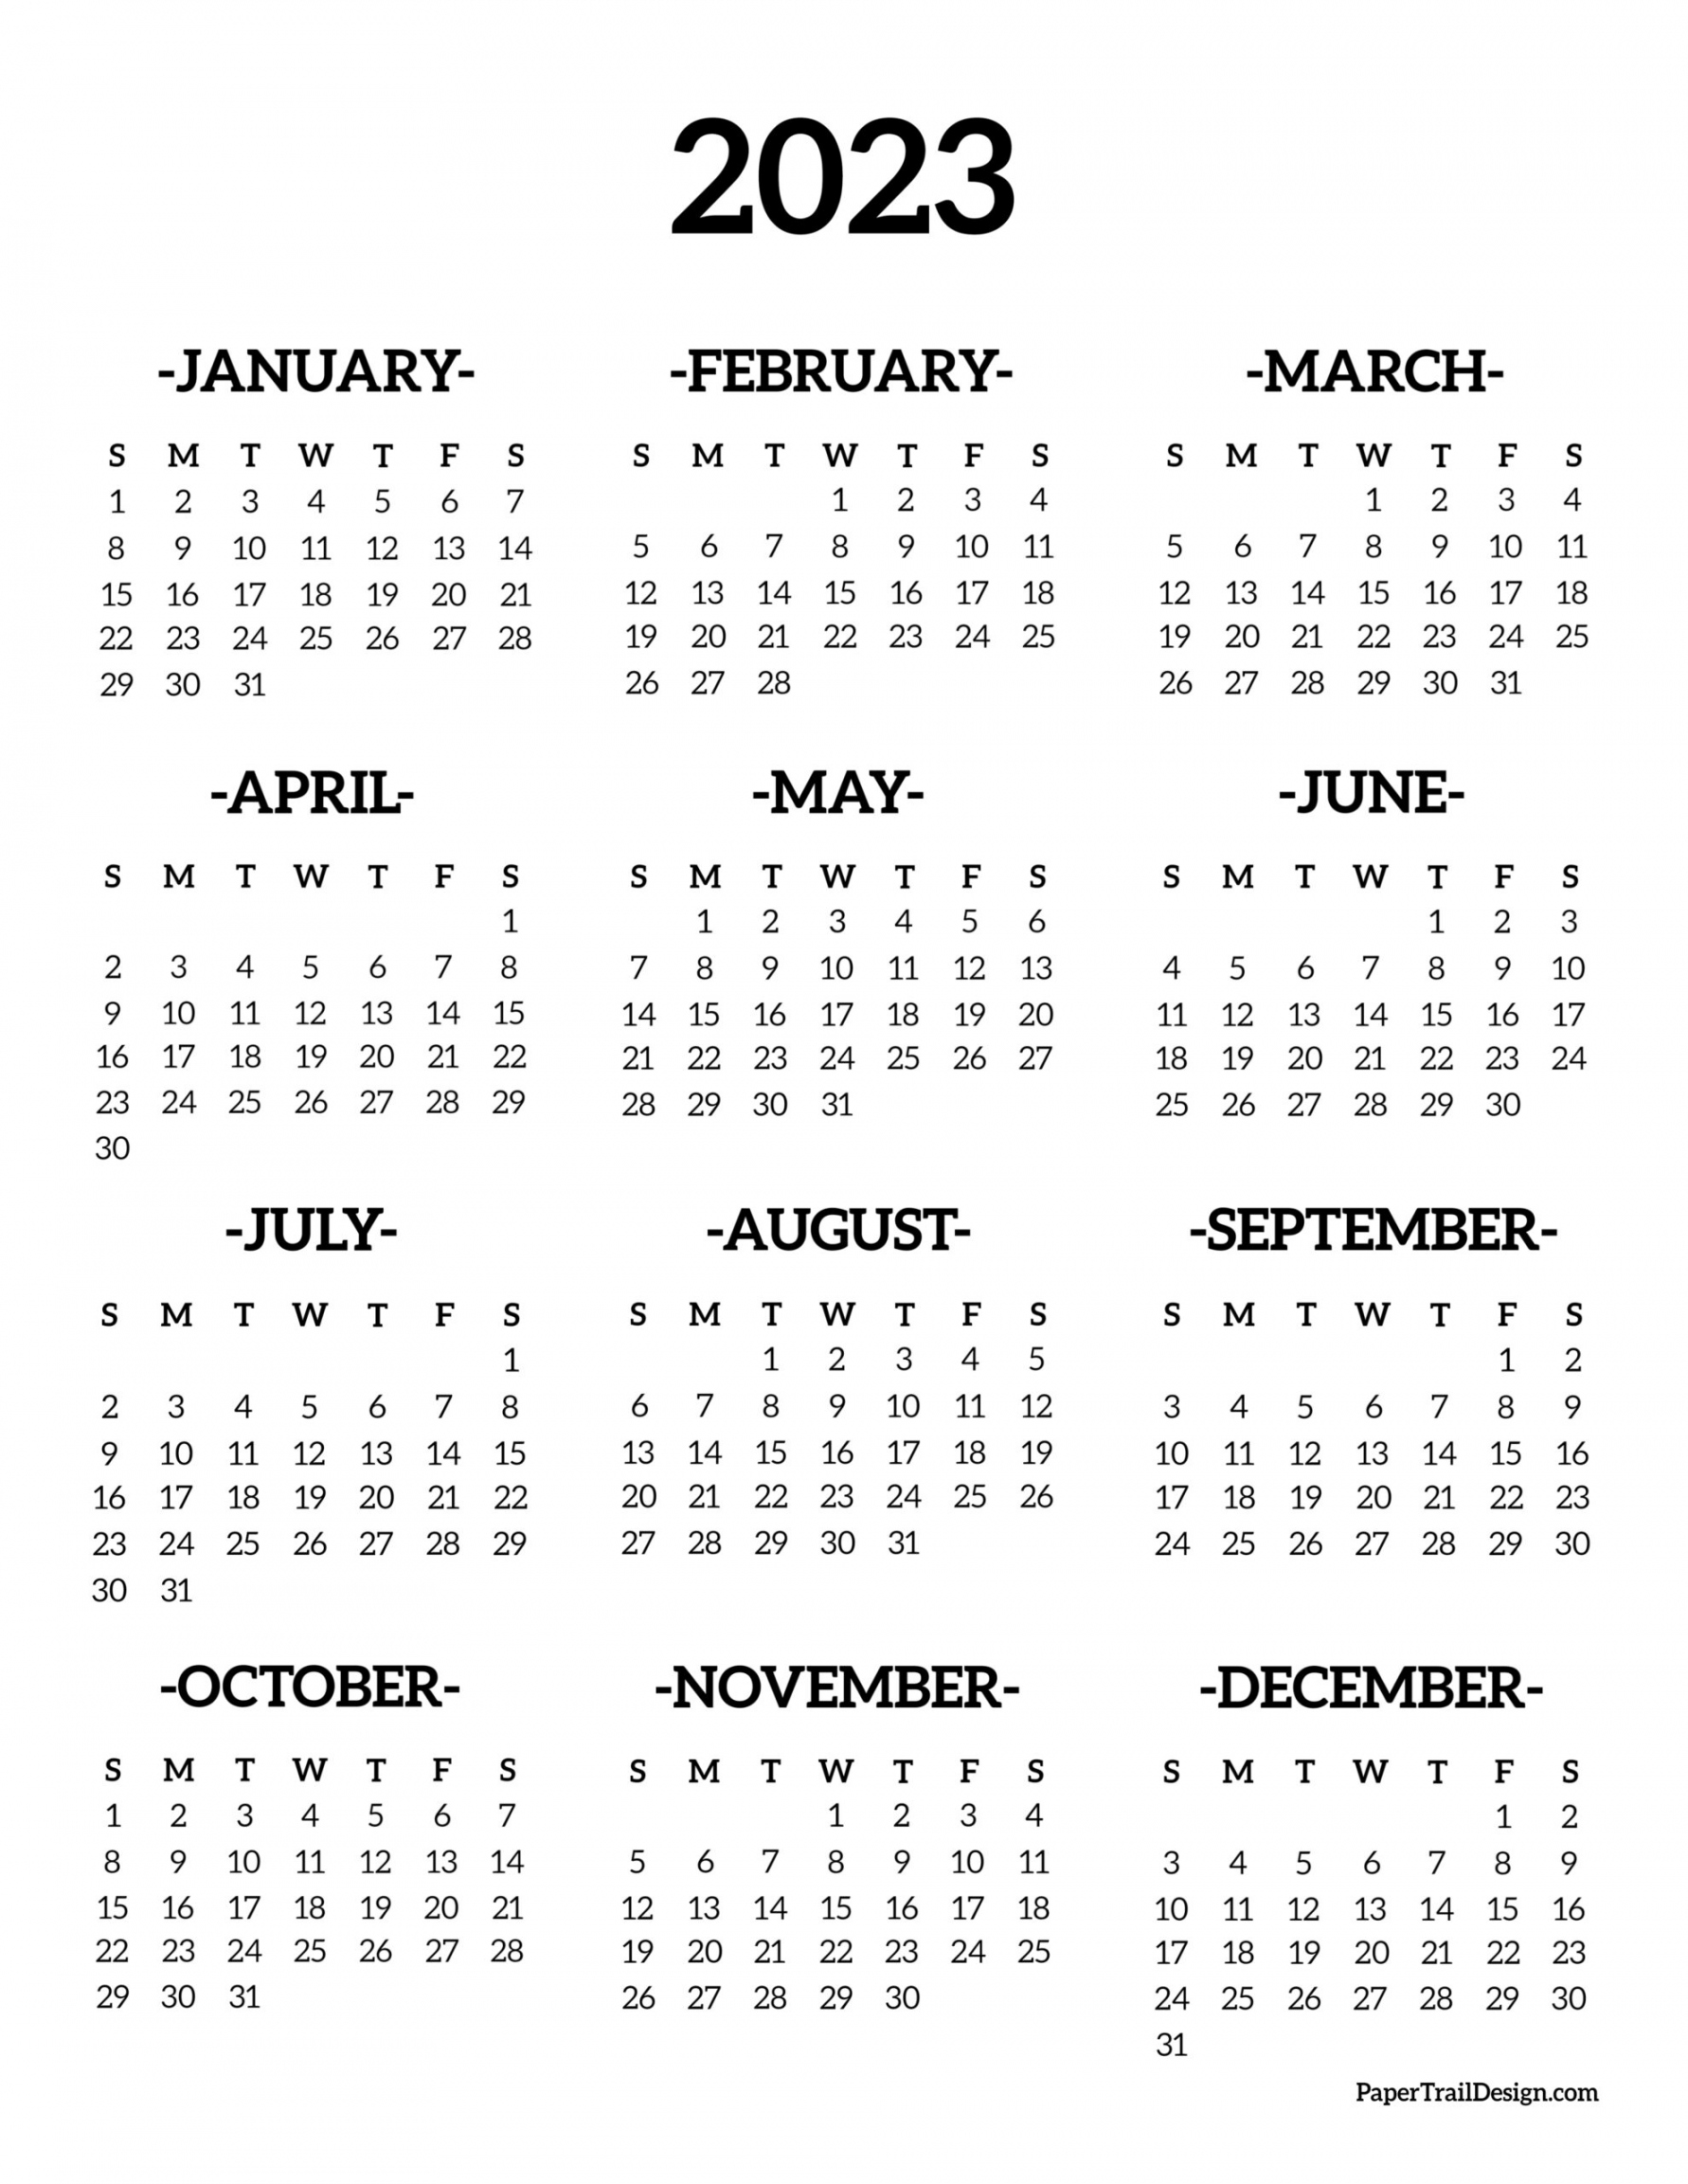 Calendar  Printable One Page - Paper Trail Design - FREE Printables - Year At A Glance Calendar 2023 Free Printable